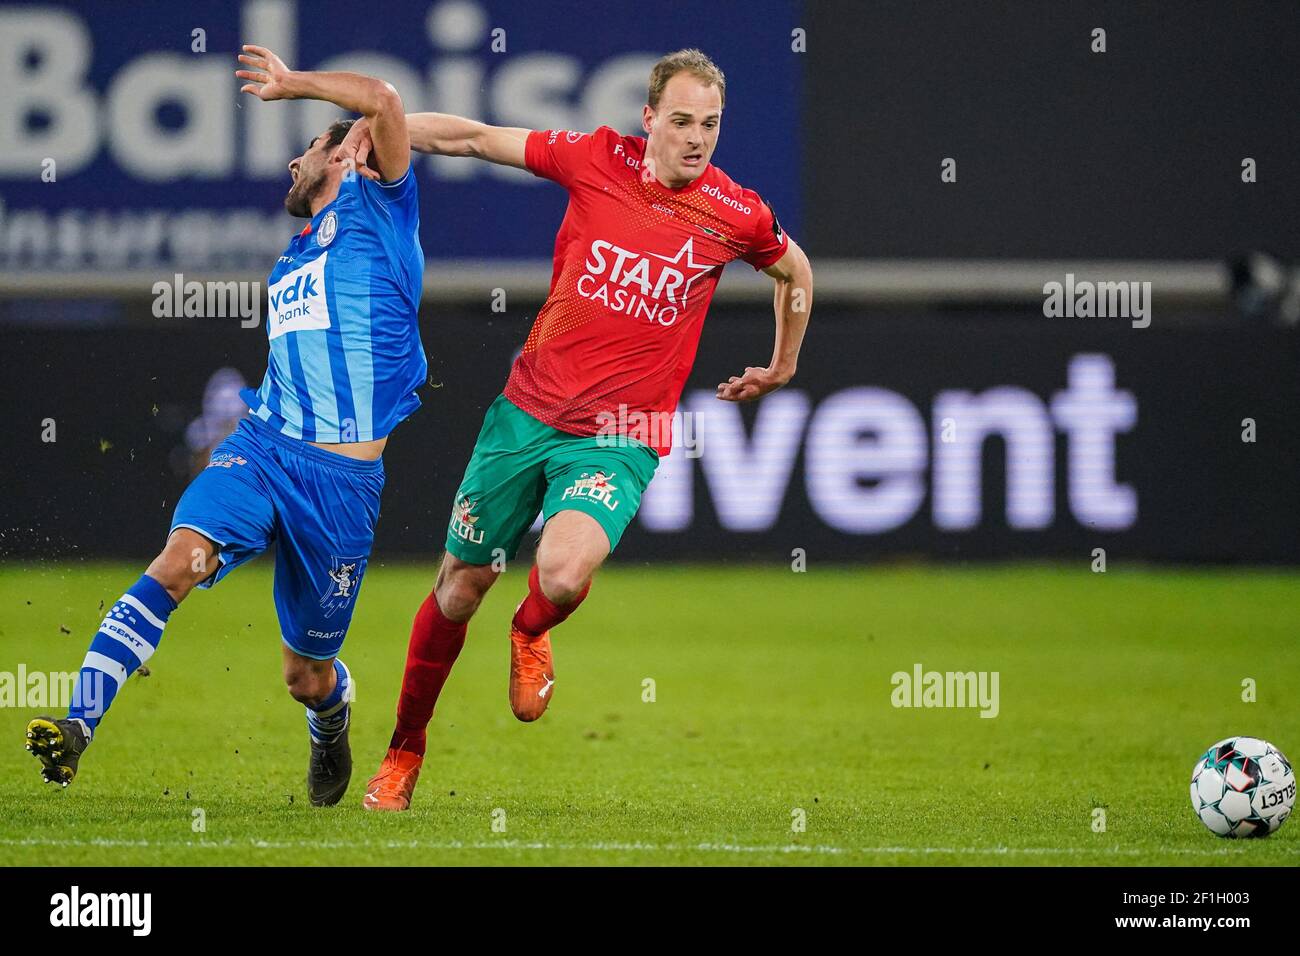 Gent Belgium March 8 Milad Mohammadi Of Kaa Gent And Brecht Capon Of Kv Oostende During The Jupiler Pro League Match Between Kaa Gent And Kv Ooste Stock Photo Alamy